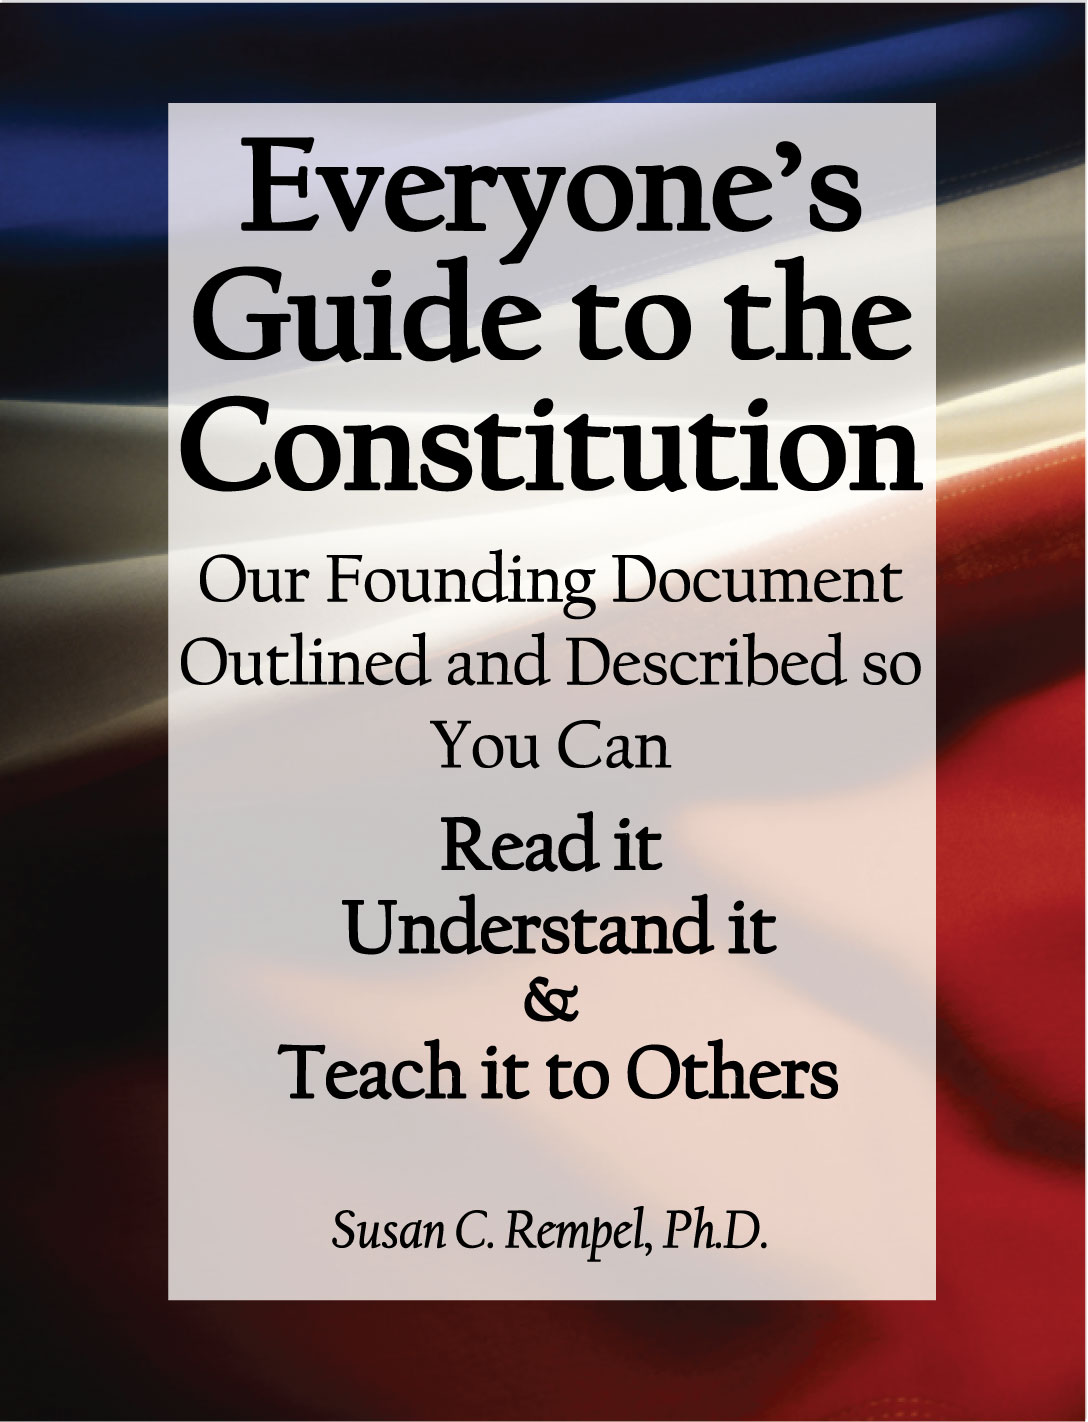 Everyone’s Guide to the Constitution. My New Book!